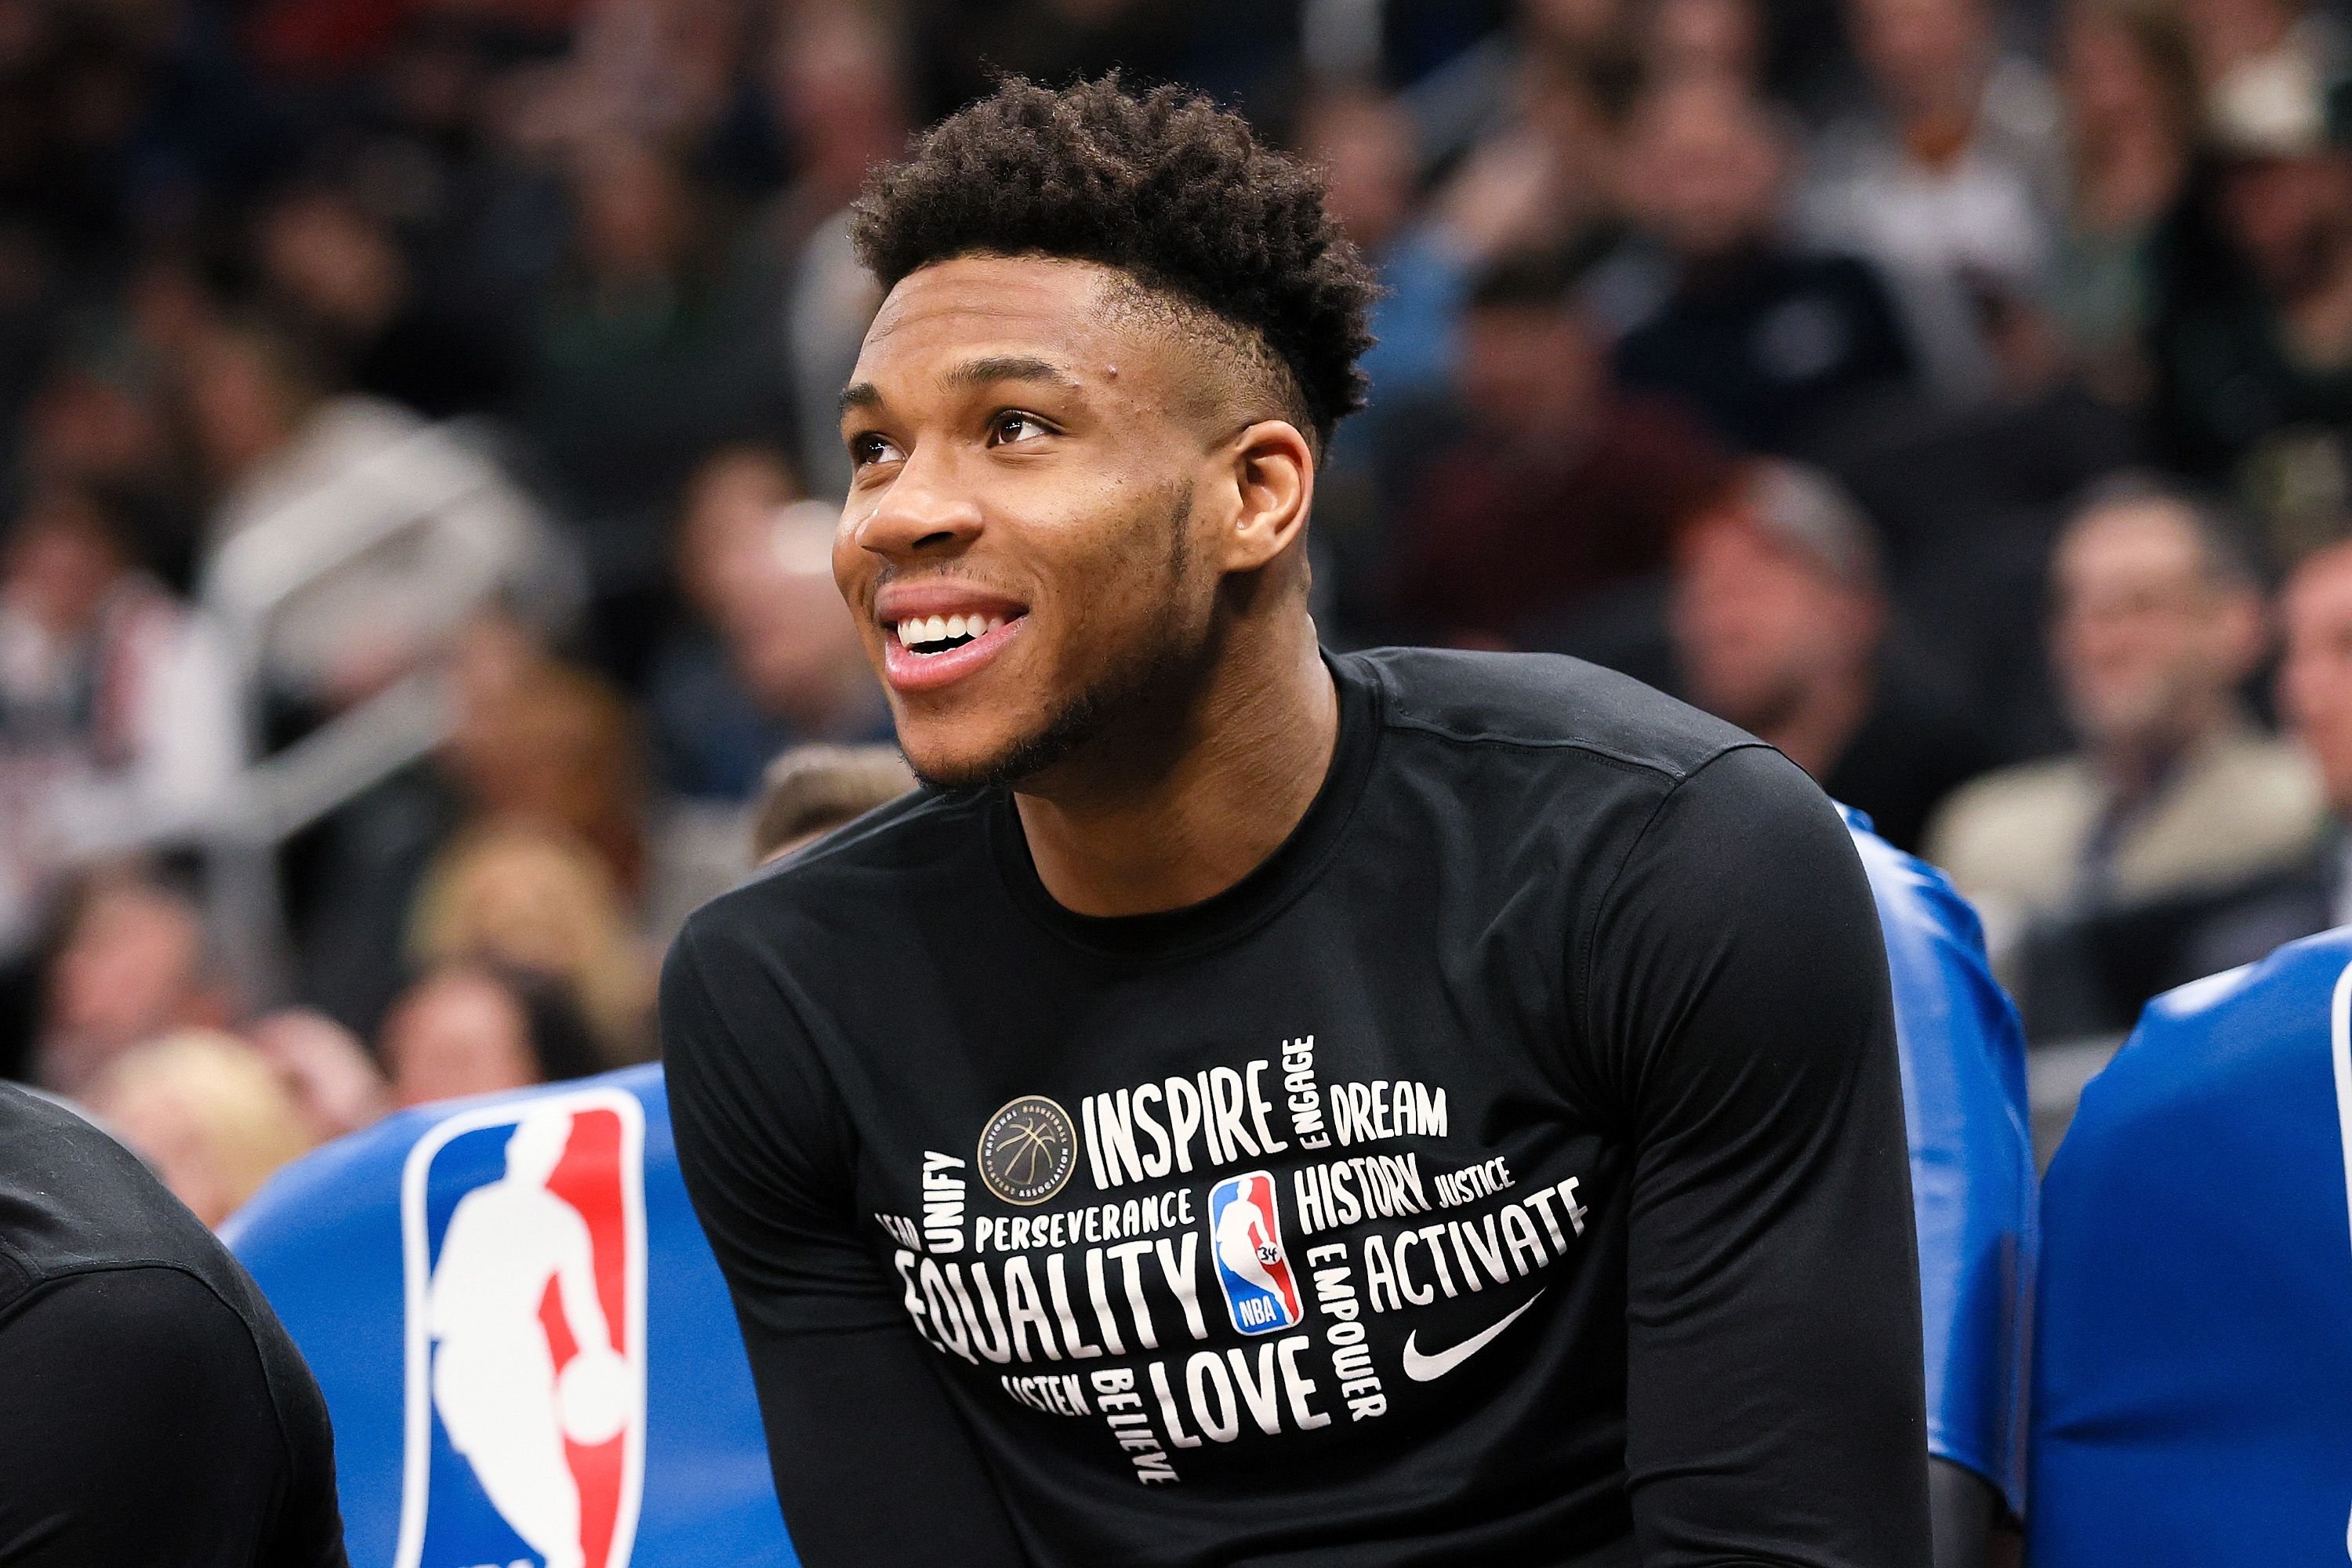 Giannis Antetokounmpo, #34 of the Milwaukee Bucks looks on from the bench in the fourth quarter against the Oklahoma City Thunder at the Fiserv Forum on February 28, 2020 in Milwaukee, Wisconsin | Photo: Getty Images 